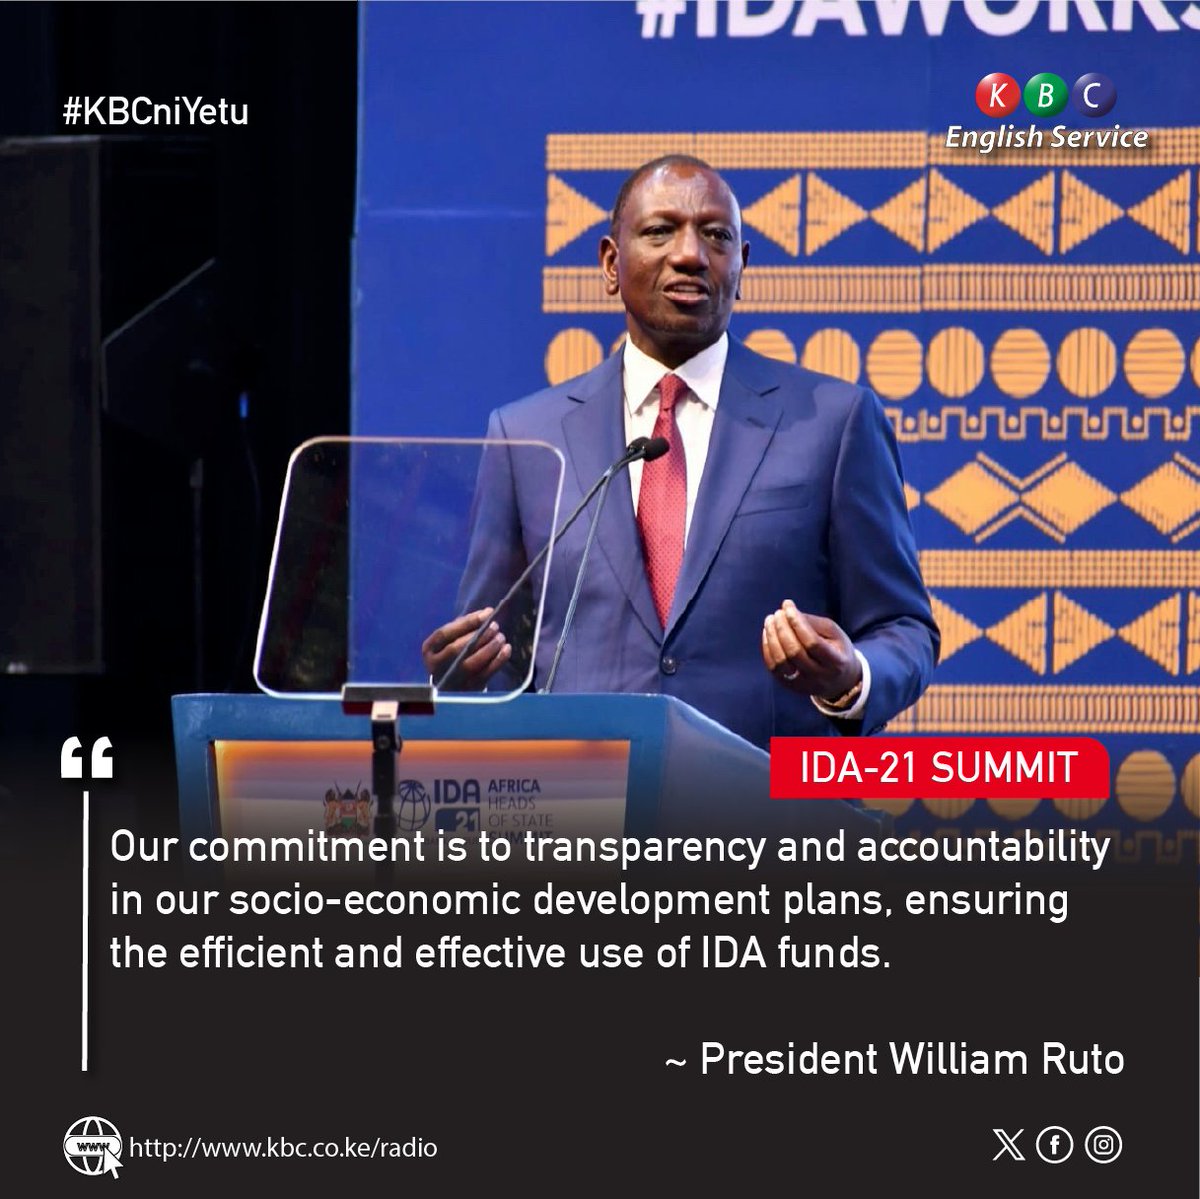 IDA-21 SUMMIT Our commitment is to transparency and accountability in our socio-economic development plans, ensuring the efficient and effective use of IDA funds. ~President William Ruto #idaworks #ida21nairobi #kenya